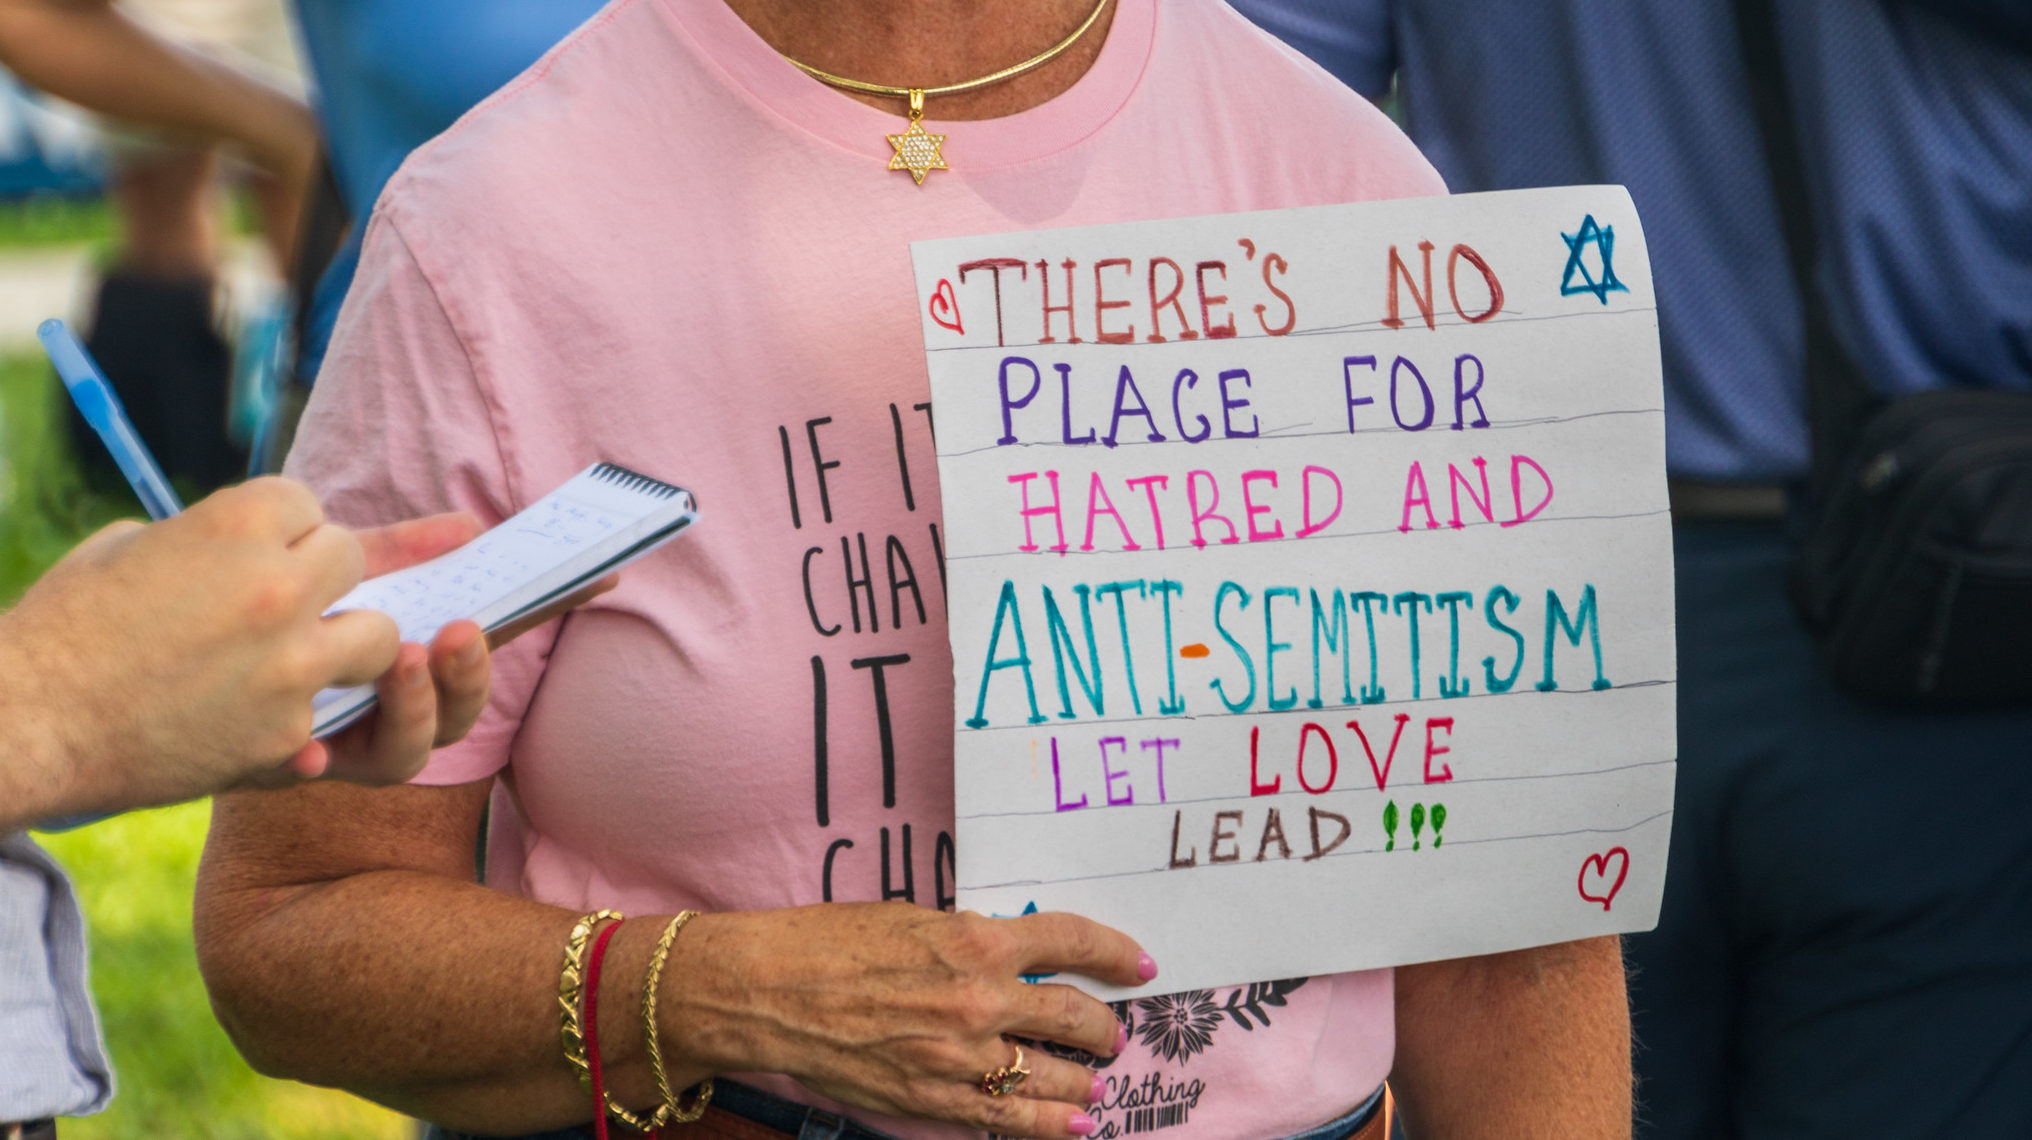 Social Media, Online Echo Chambers Fueling Antisemitism in US, Experts Say